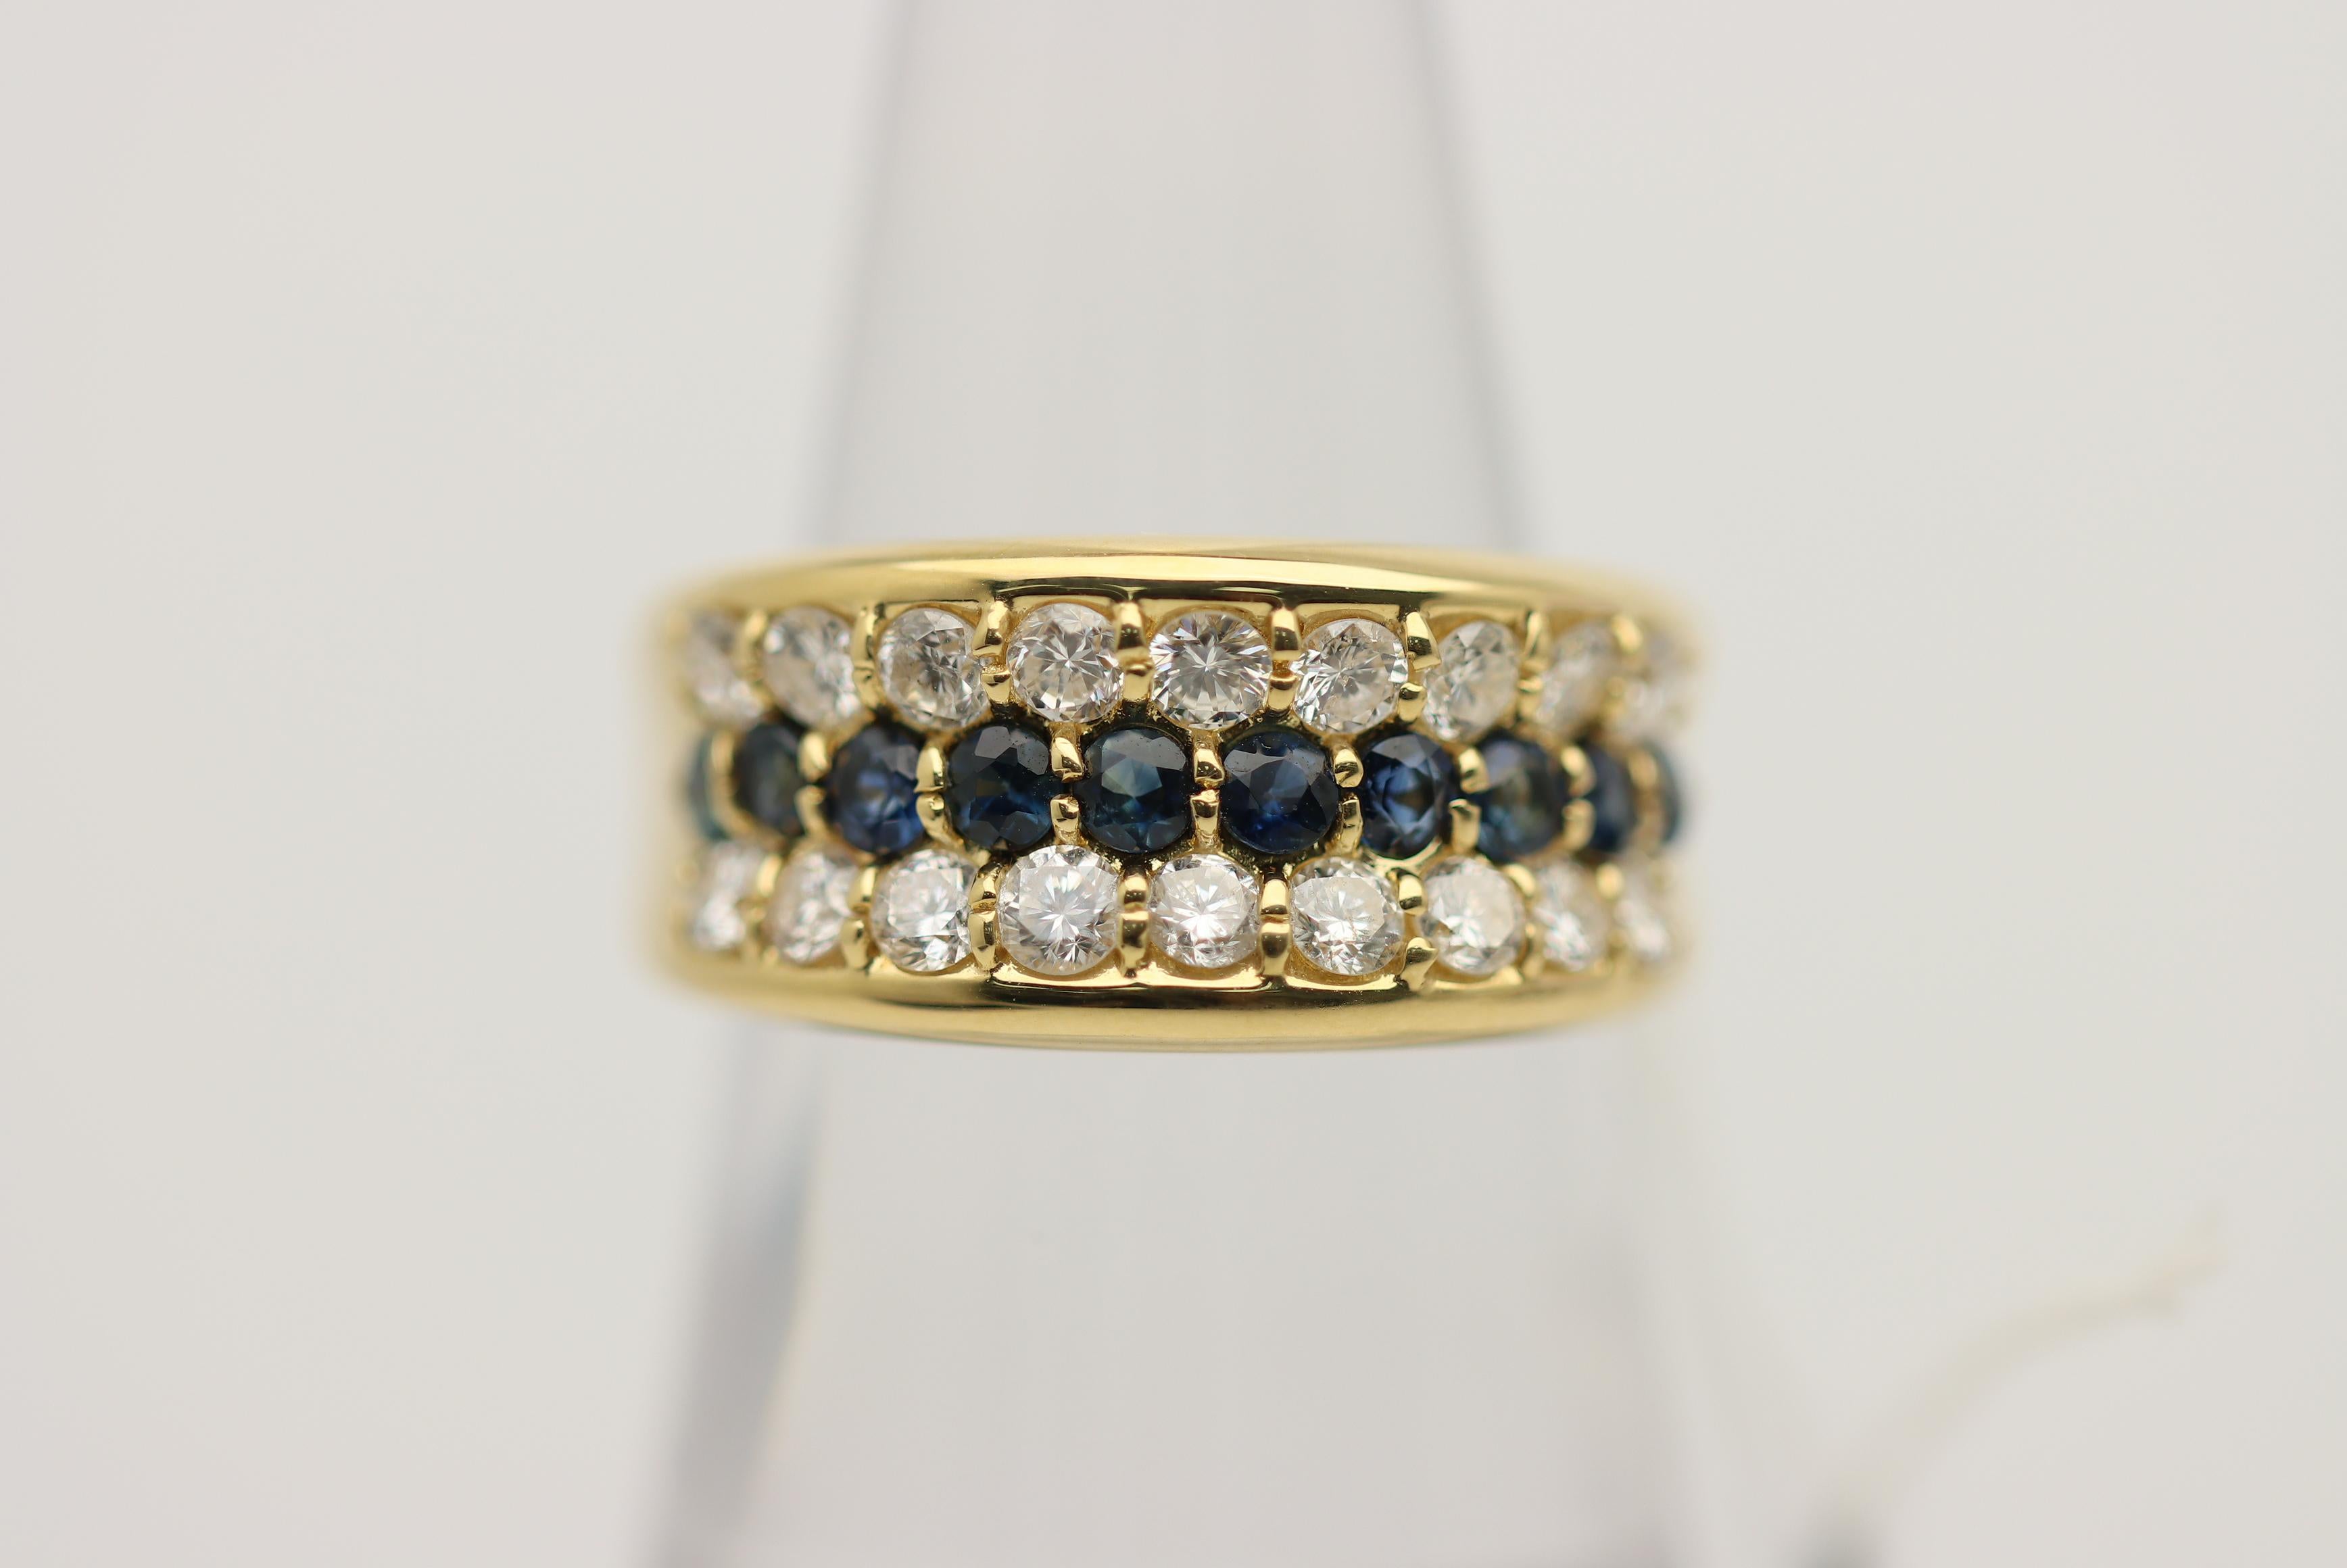 A lovely gold ring featuring a single row of sapphires set between two rows or diamonds. The sapphires weigh 0.78 carats of round blue sapphires while the diamonds weigh 1.06 carats. Made in 18k yellow gold and ready to be worn.

Ring Size